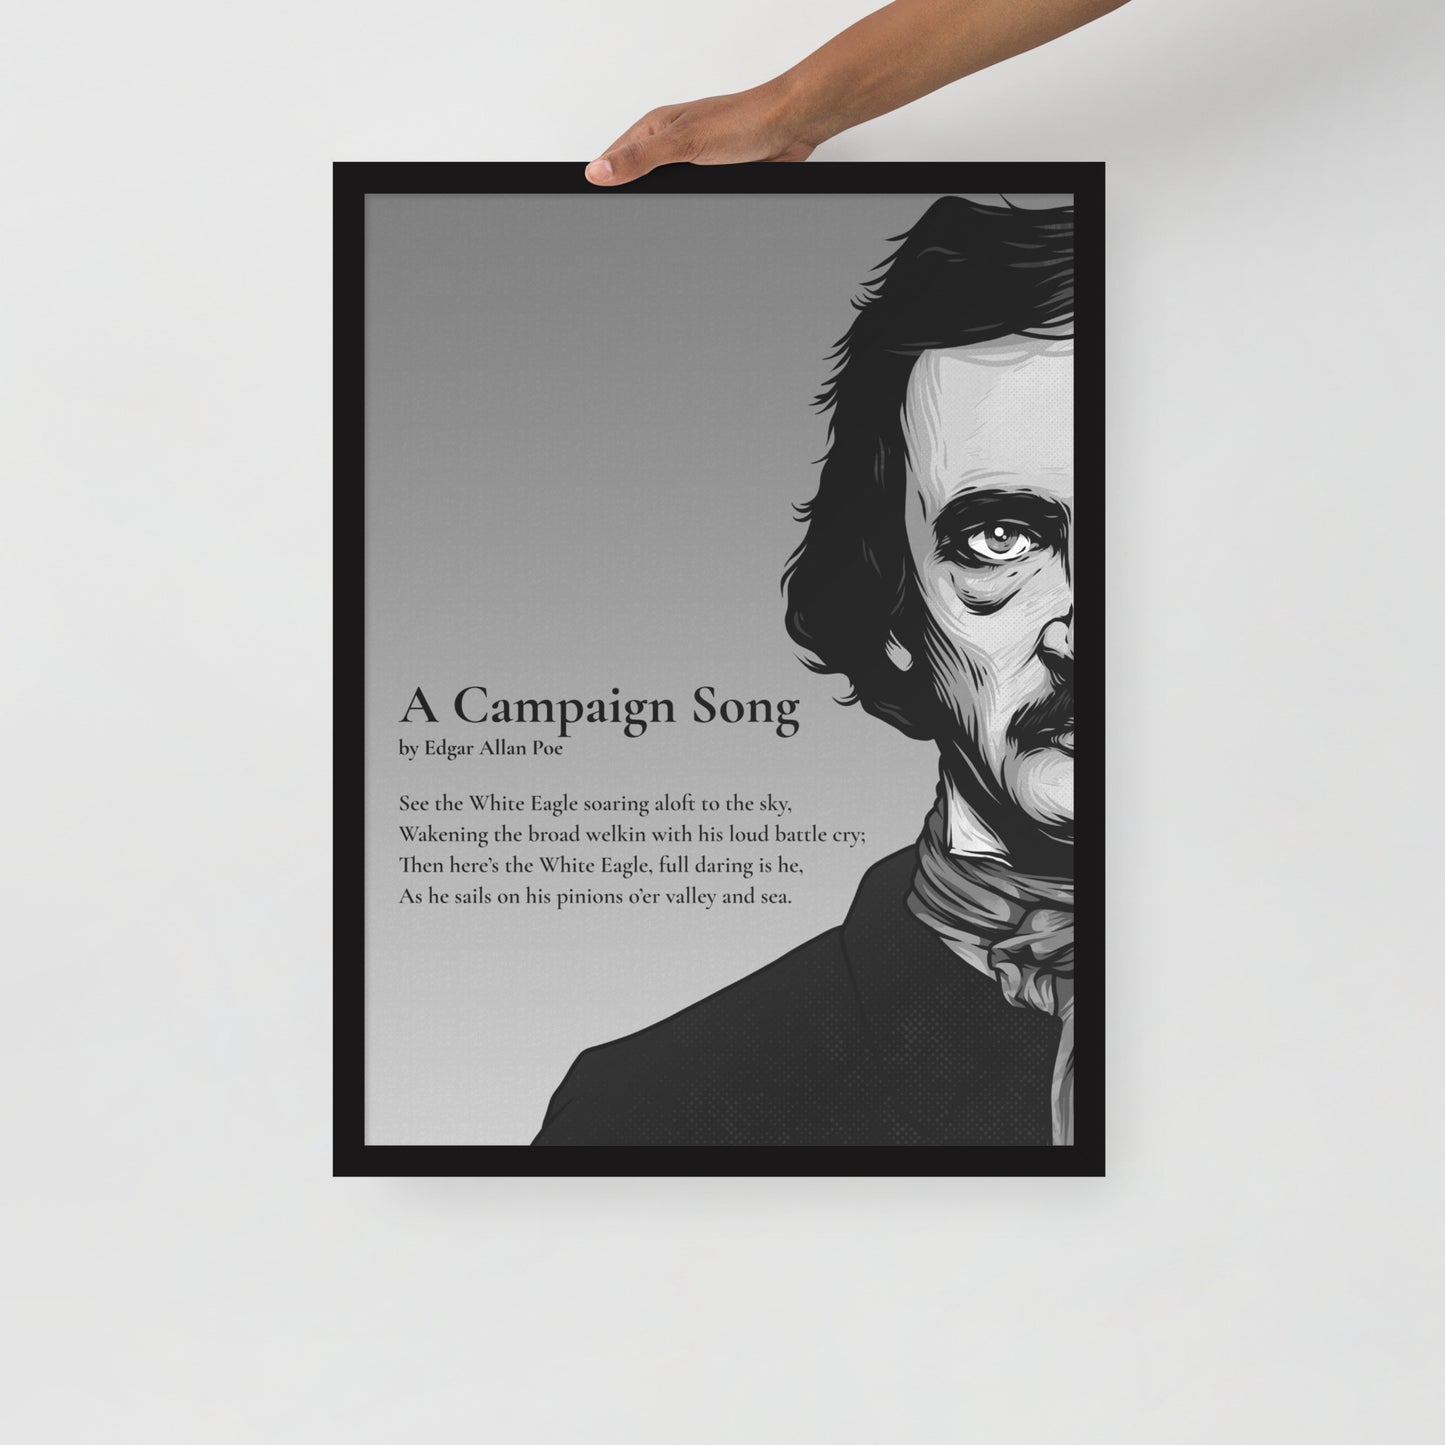 Edgar Allan Poe's 'A Campaign Song' Framed Matted Poster - 18 x 24 Black Frame